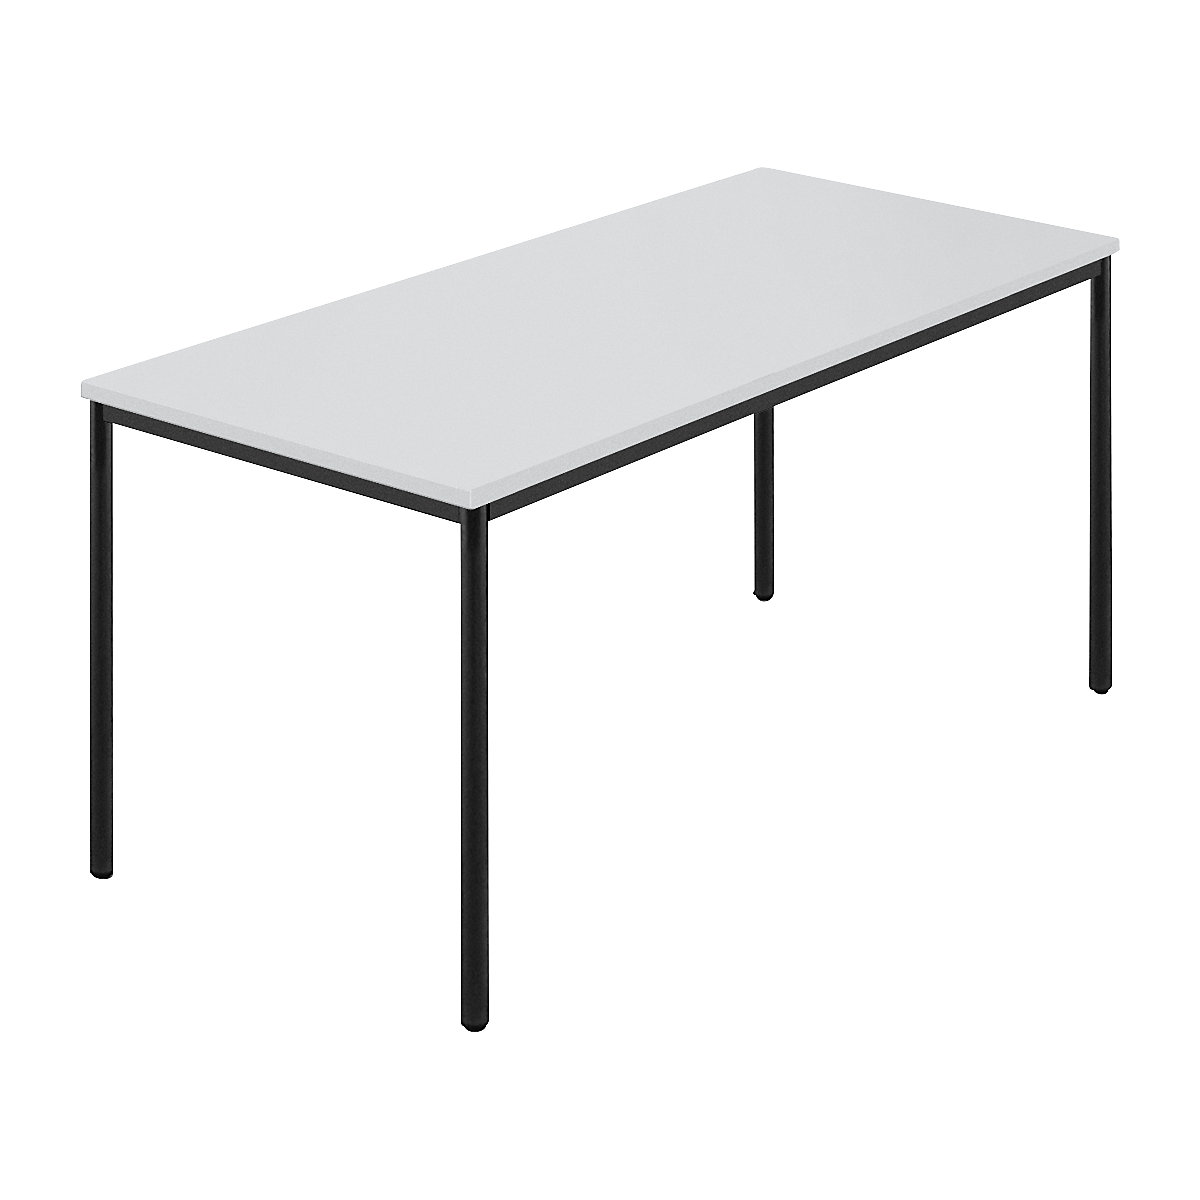 Rectangular table, coated round tubing, WxD 1500 x 800 mm, grey / anthracite-5